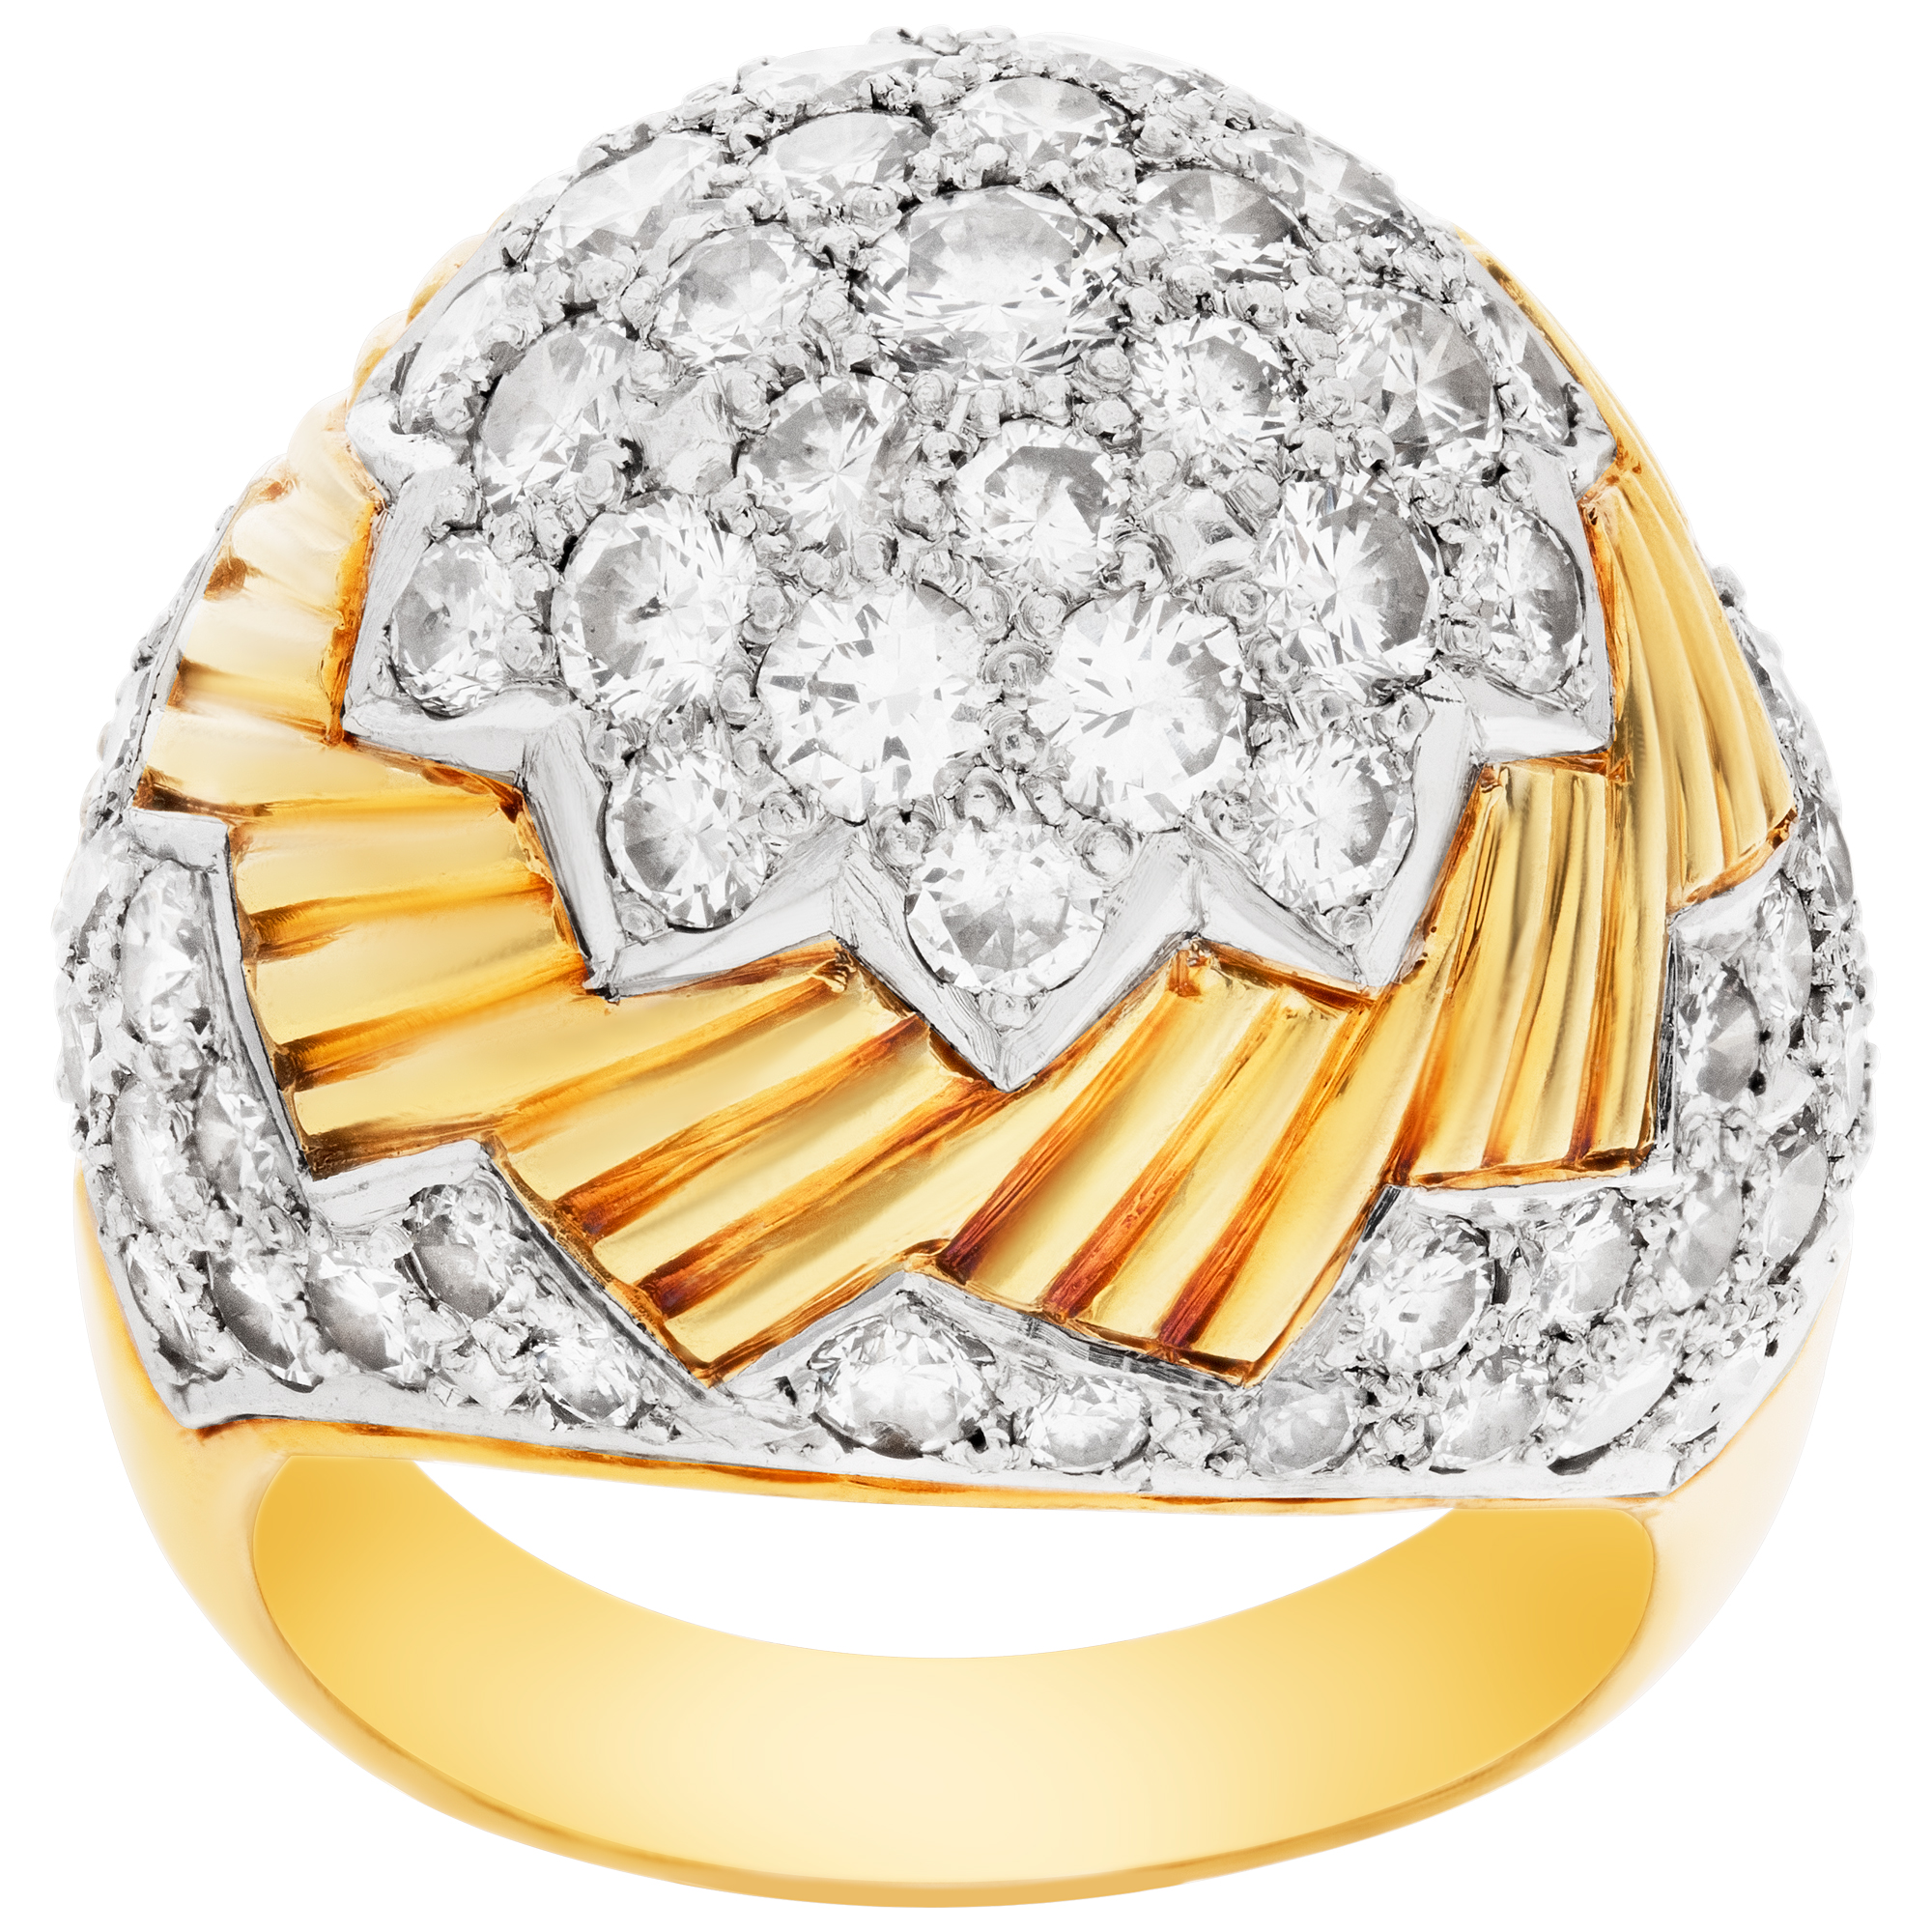 Signed Tiffany, vintage dome ring with round brilliant cut diamonds, set in 18K white and yellow gold